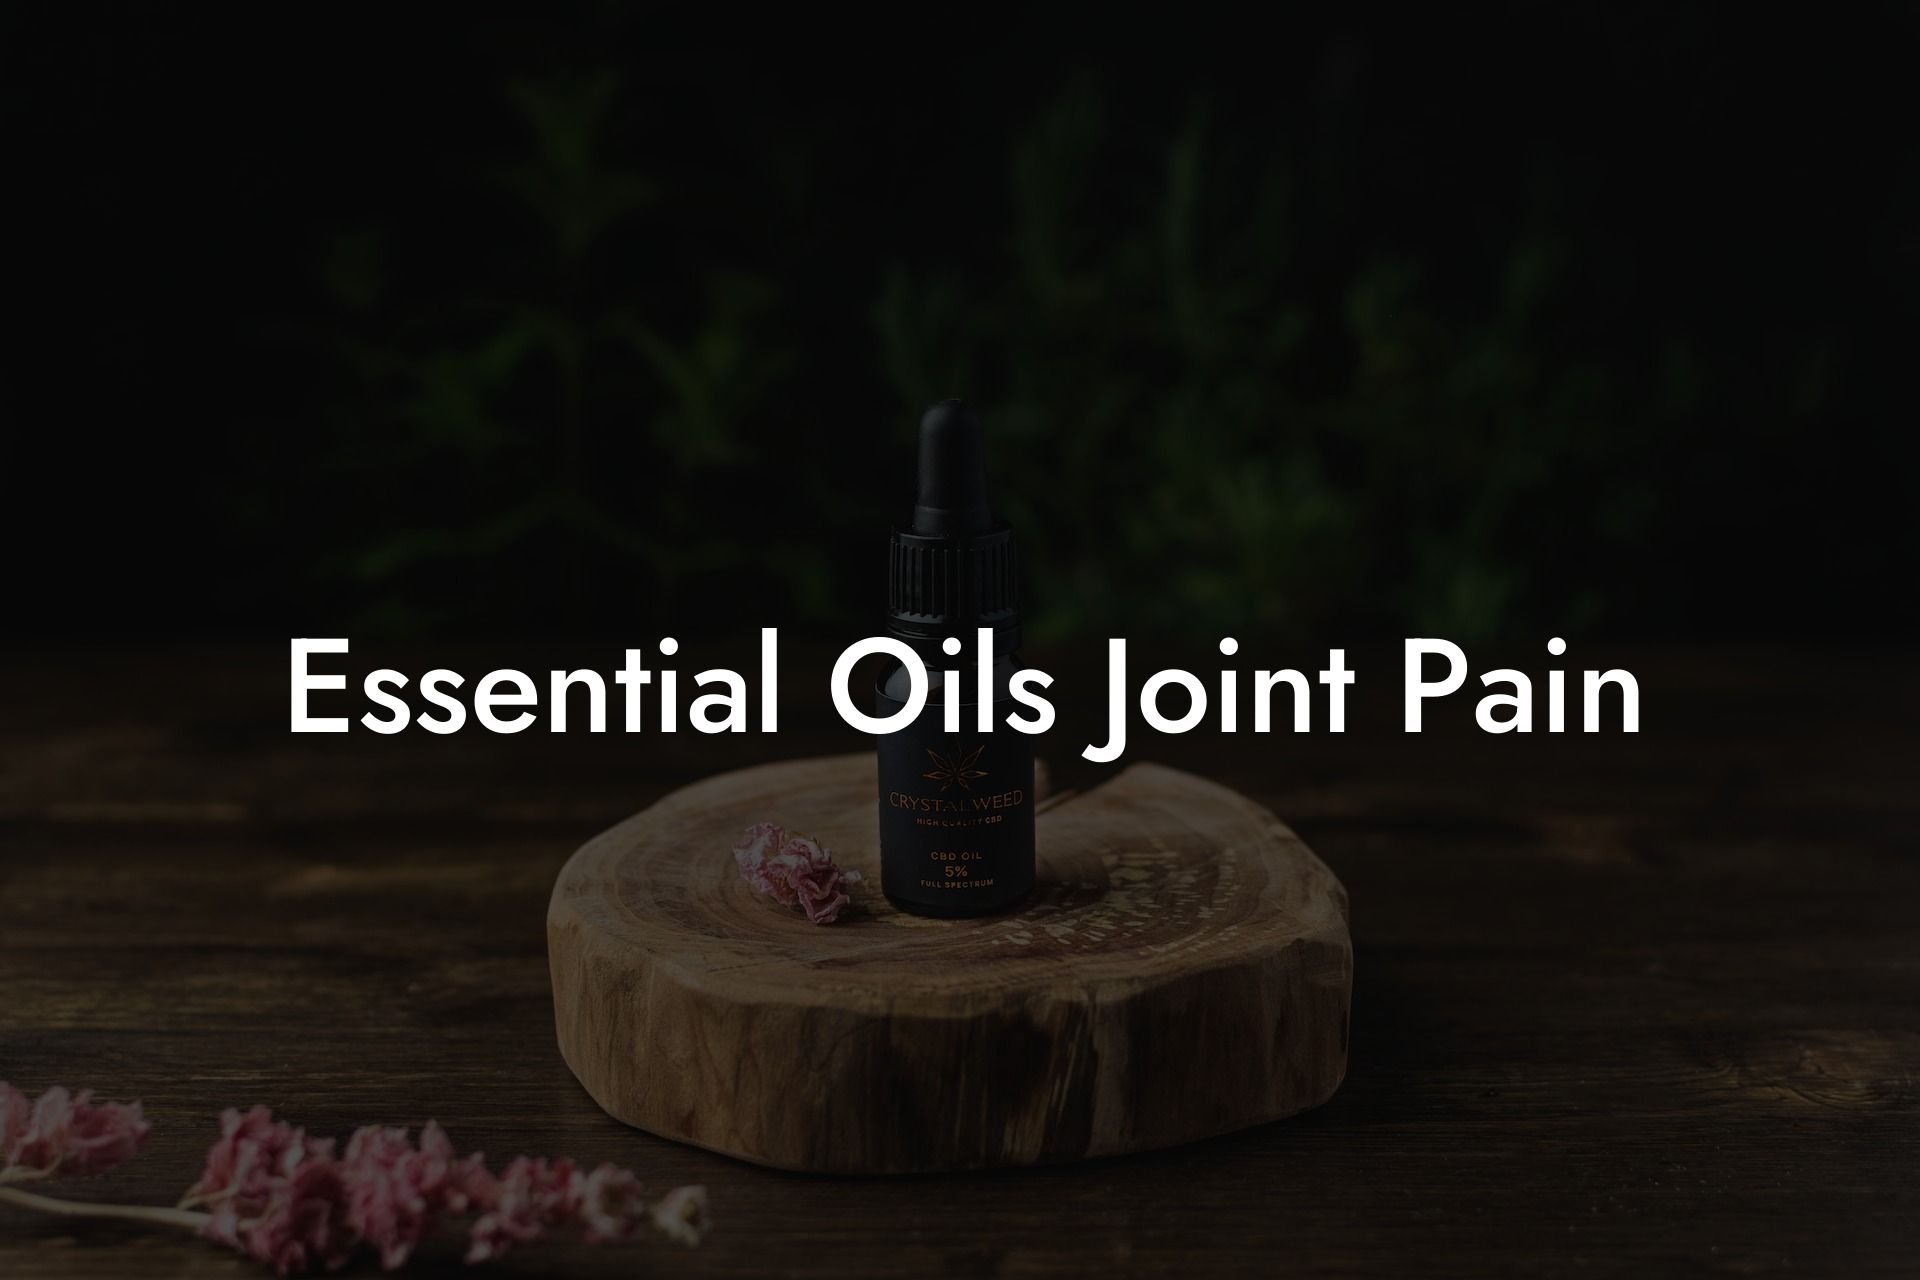 Essential Oils Joint Pain